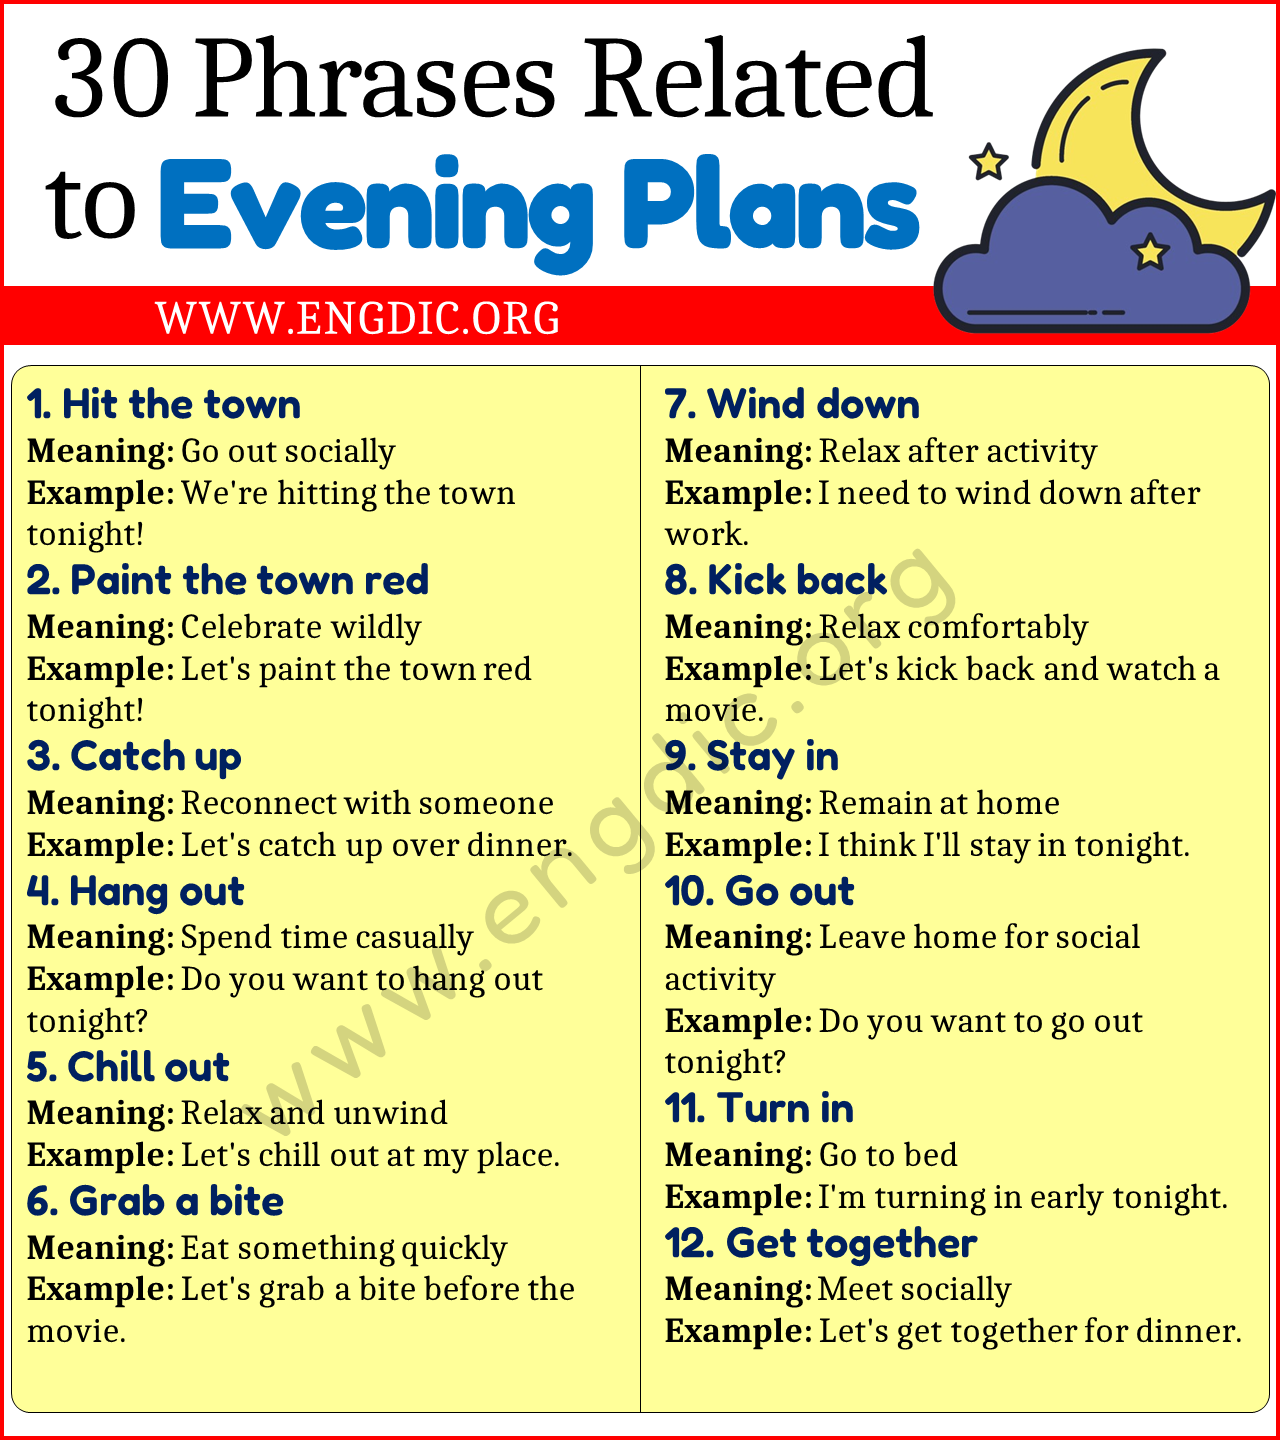 Phrases Related to Evening Plans